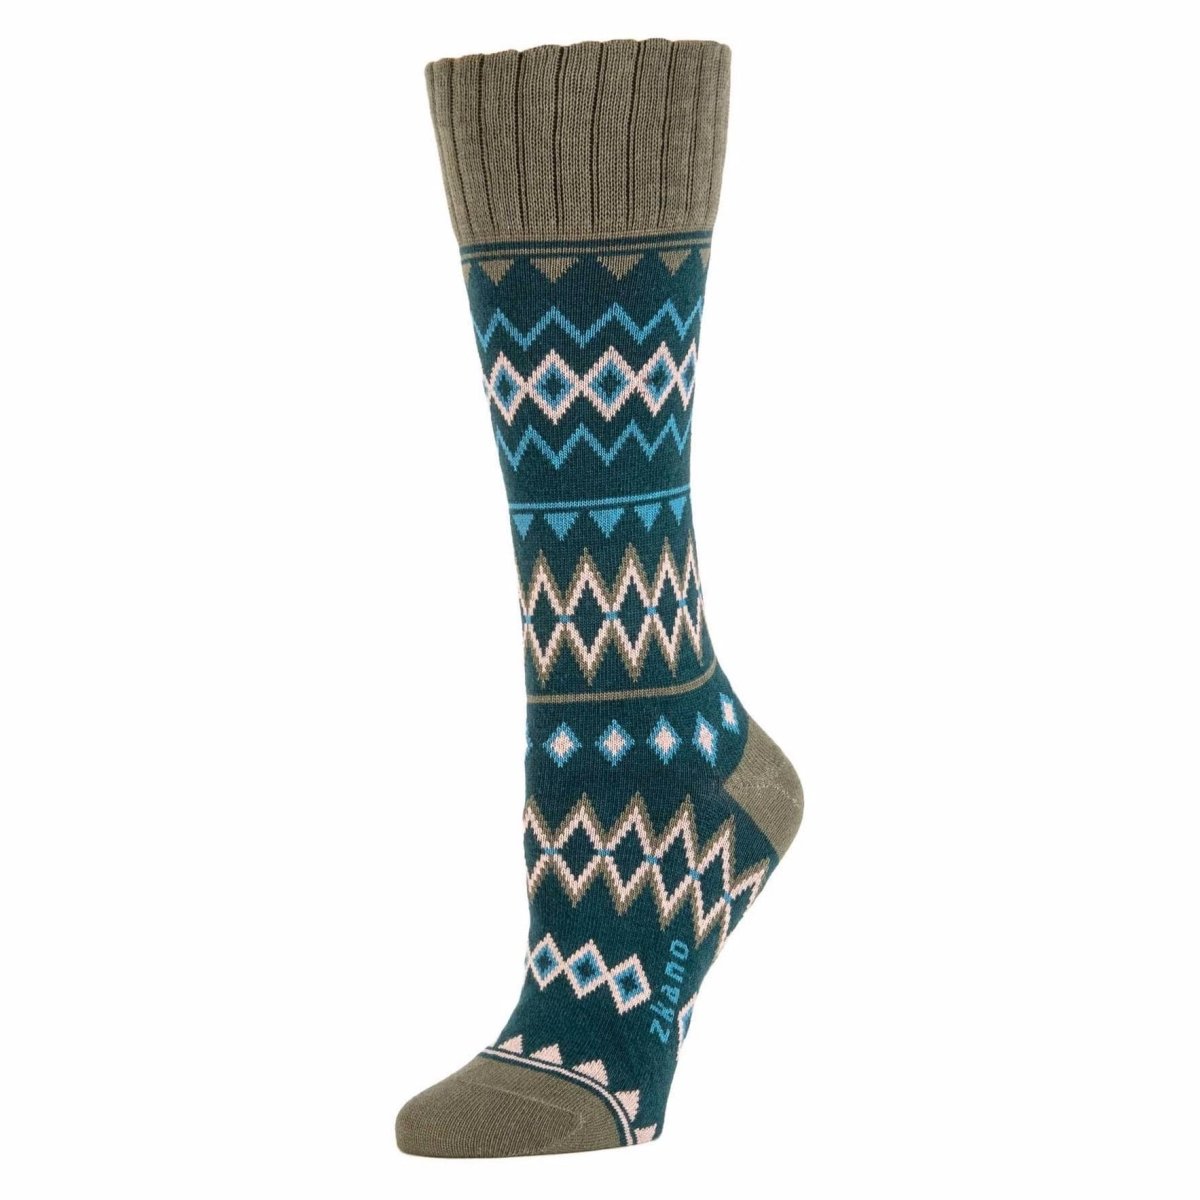 Teal sock with a blue, white and army green criss-cross pattern. Heel, toe and ribbed collar are an army green. The Winter Faire Isle Sock in Spruce is from Zkano and made in Alabama, USA.